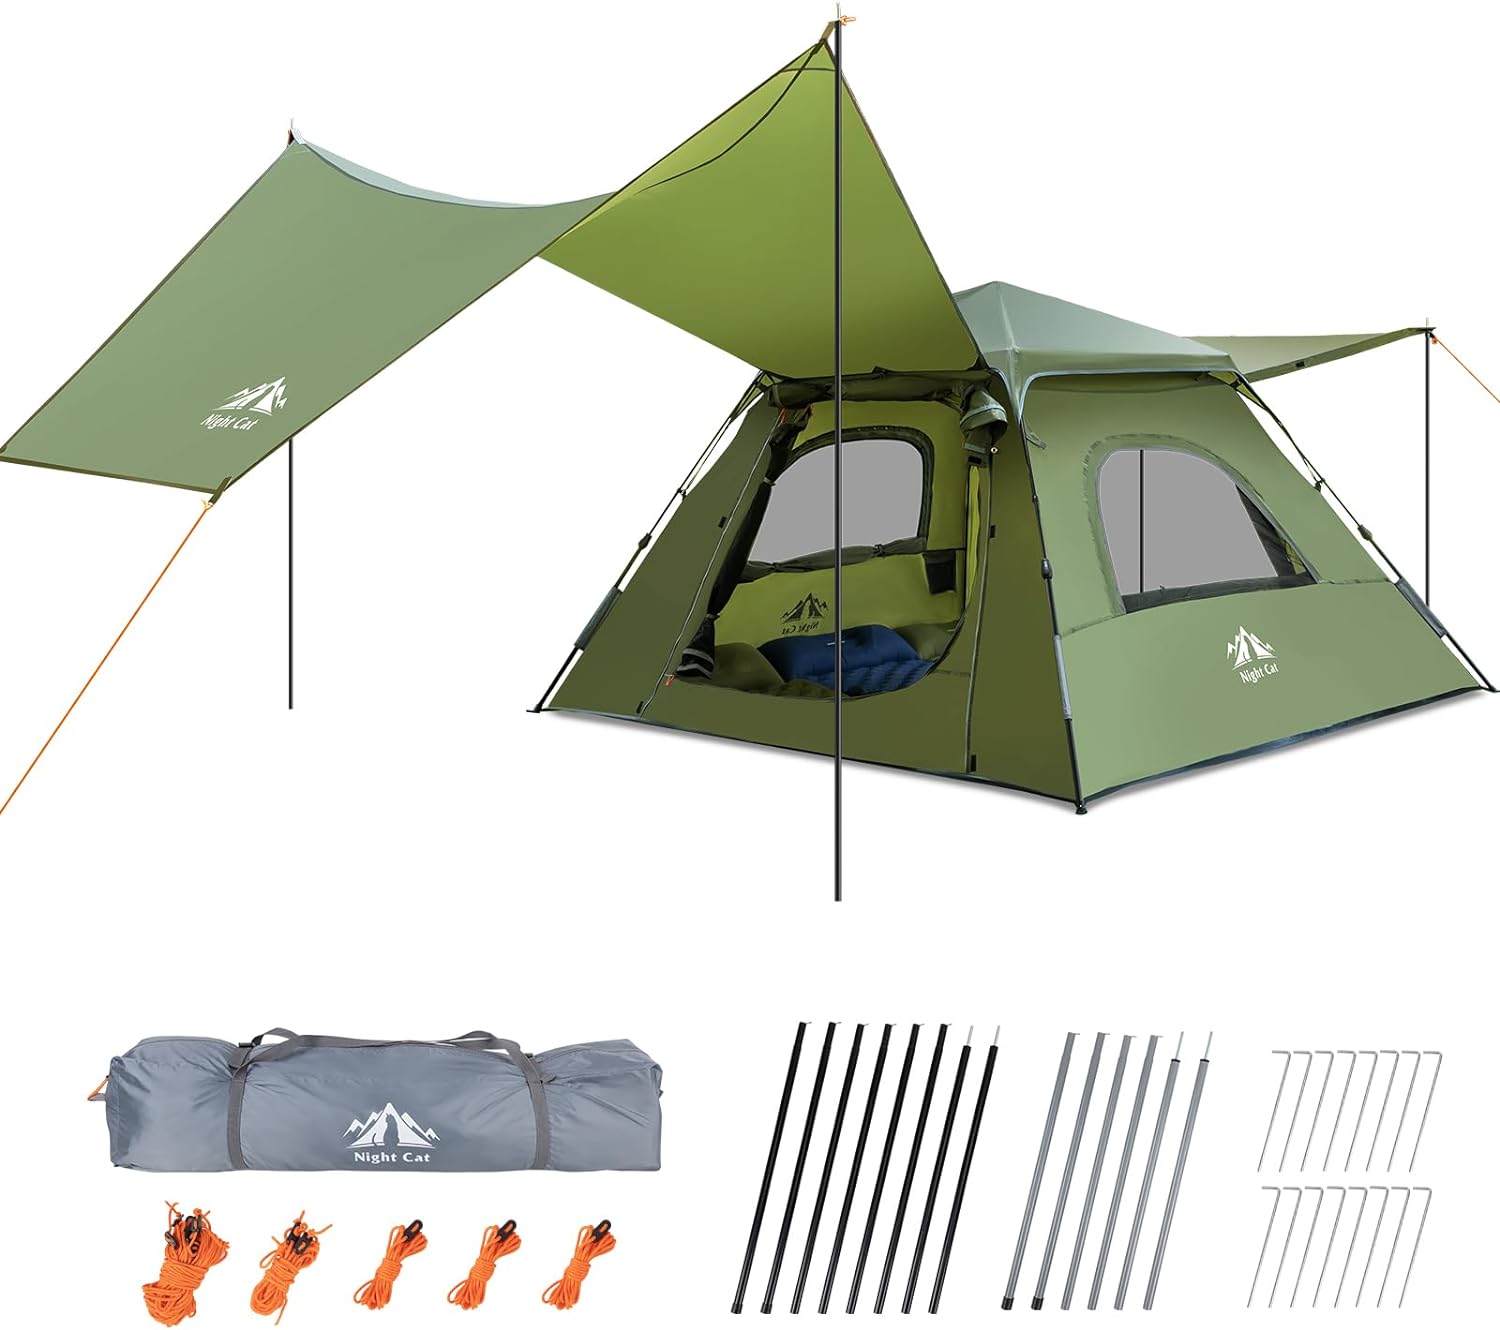 Night Cat Outdoor Camping Equipment Combination Package/ Single